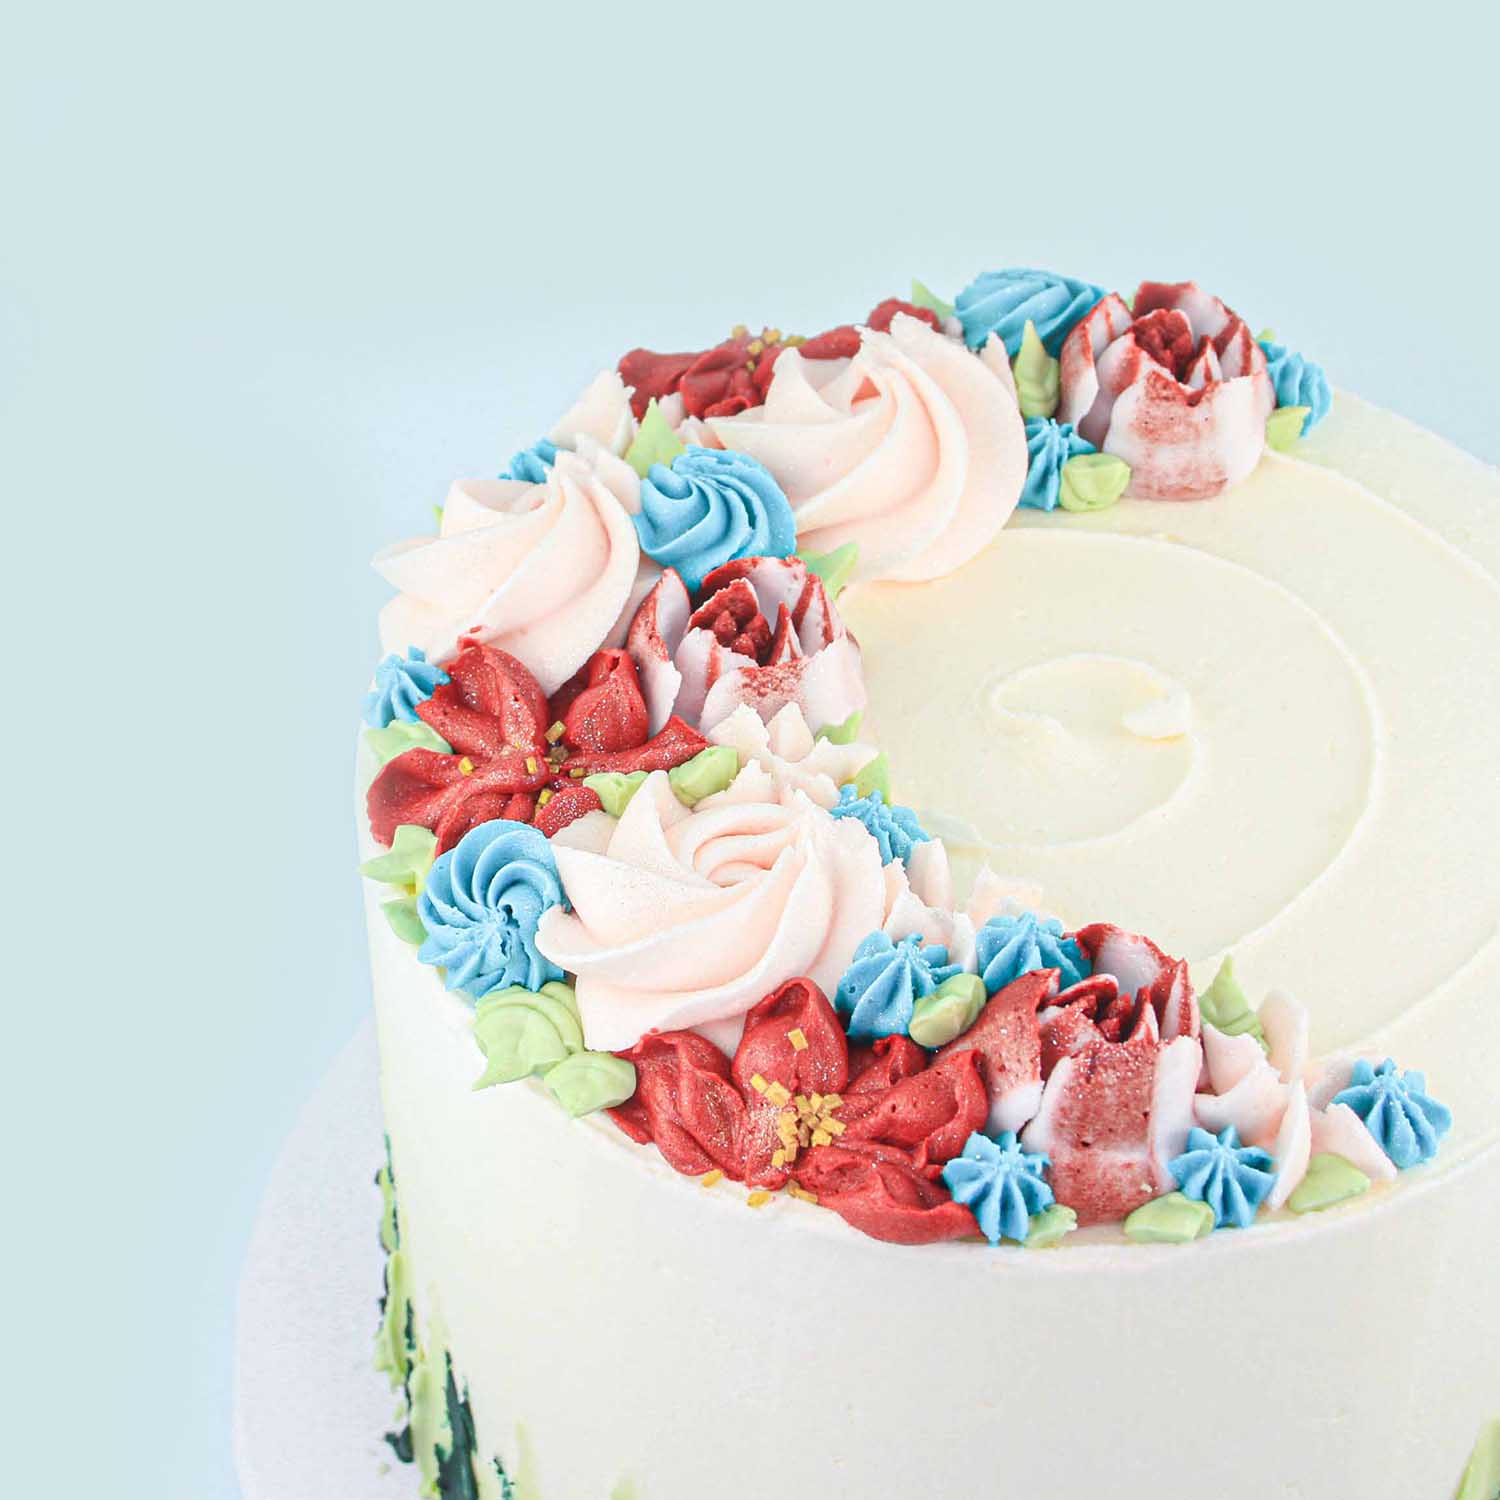 Pink, red, and blue buttercream piped flowers in the form of a cresent on top of the cake.